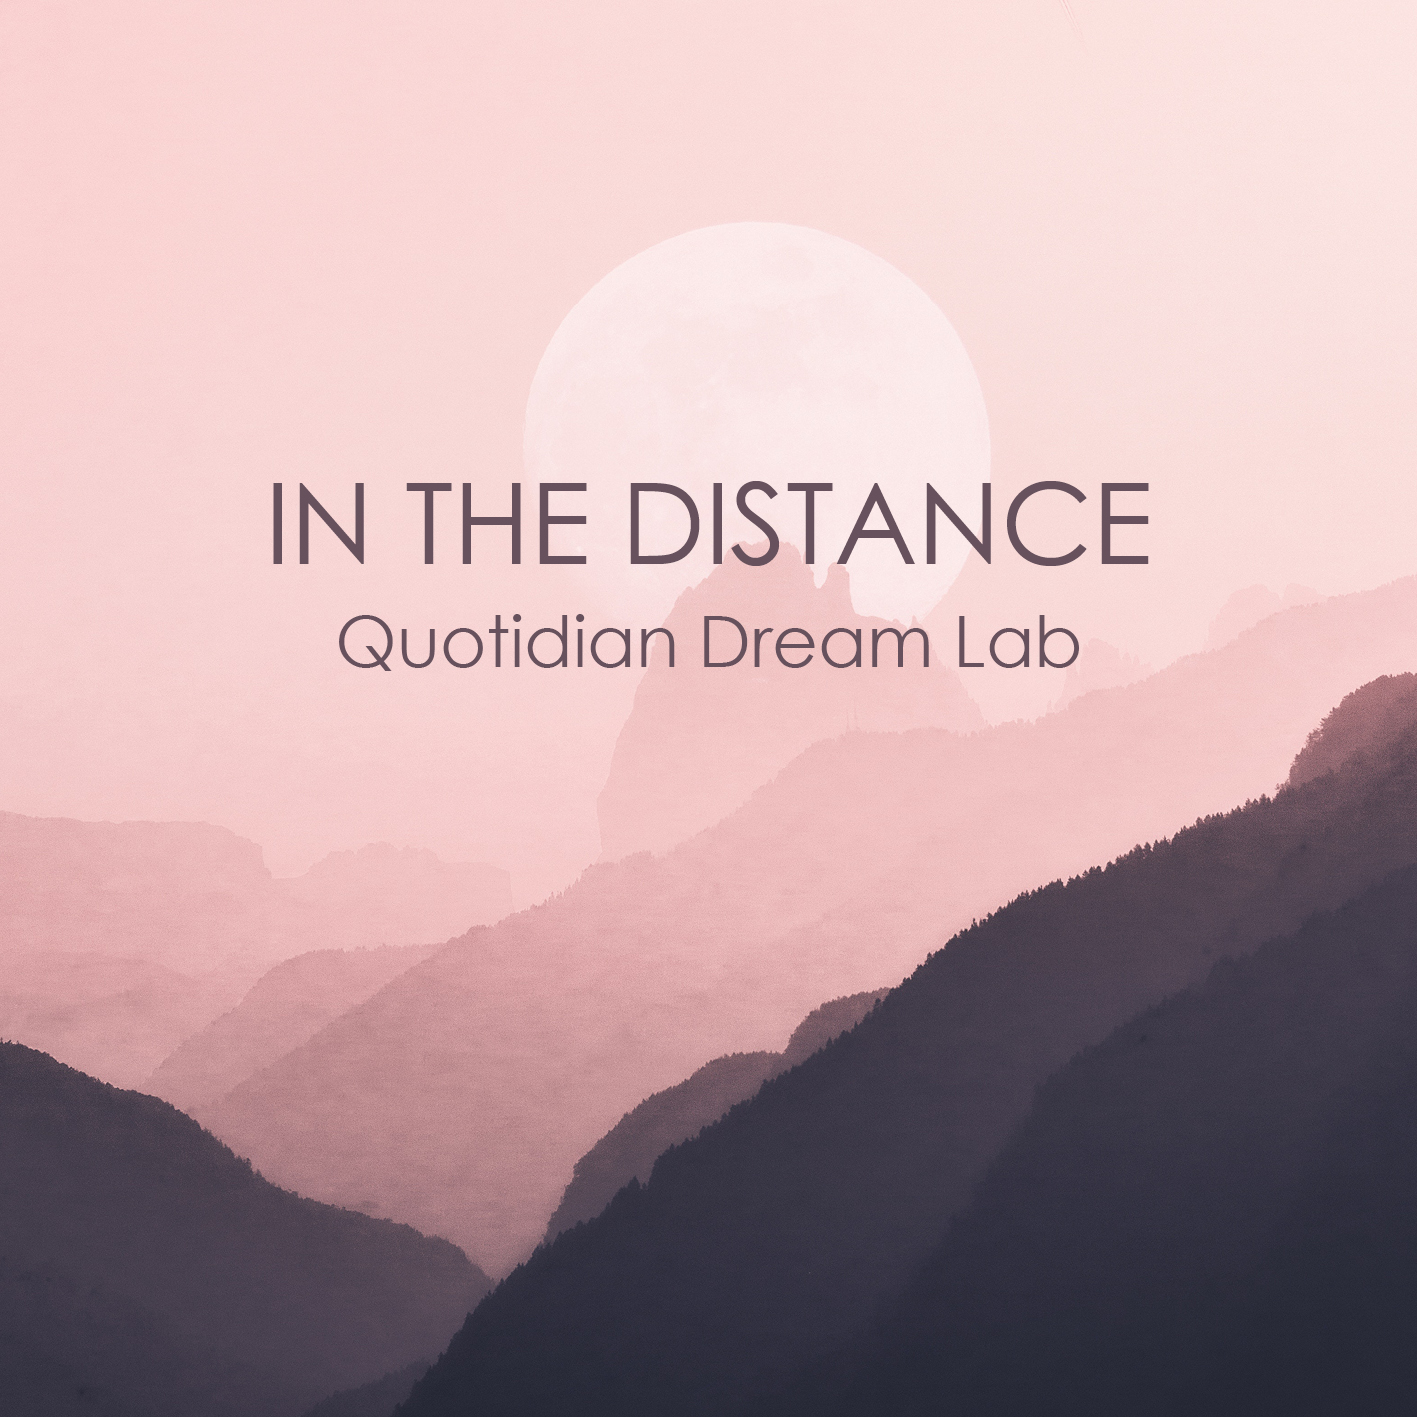 In The Distance album cover by Quotidian Dream Lab